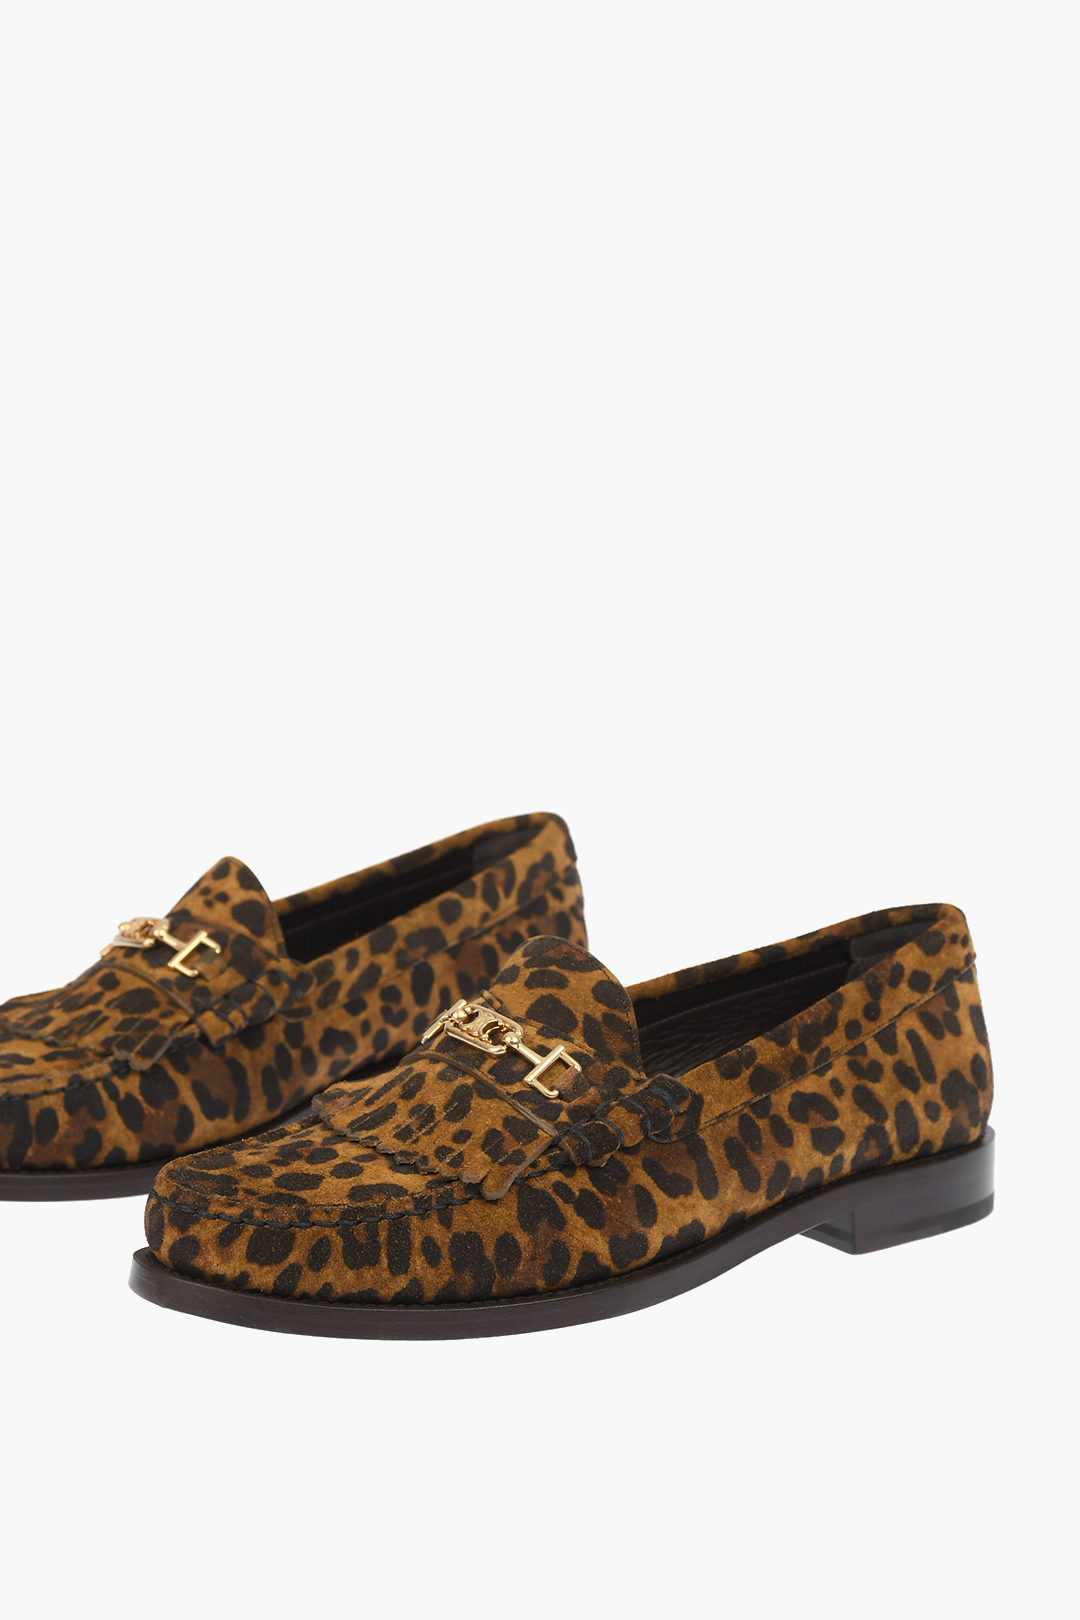 cheaper on sale LUCKY Brand Leather Suede Leopard Loafers 10 M